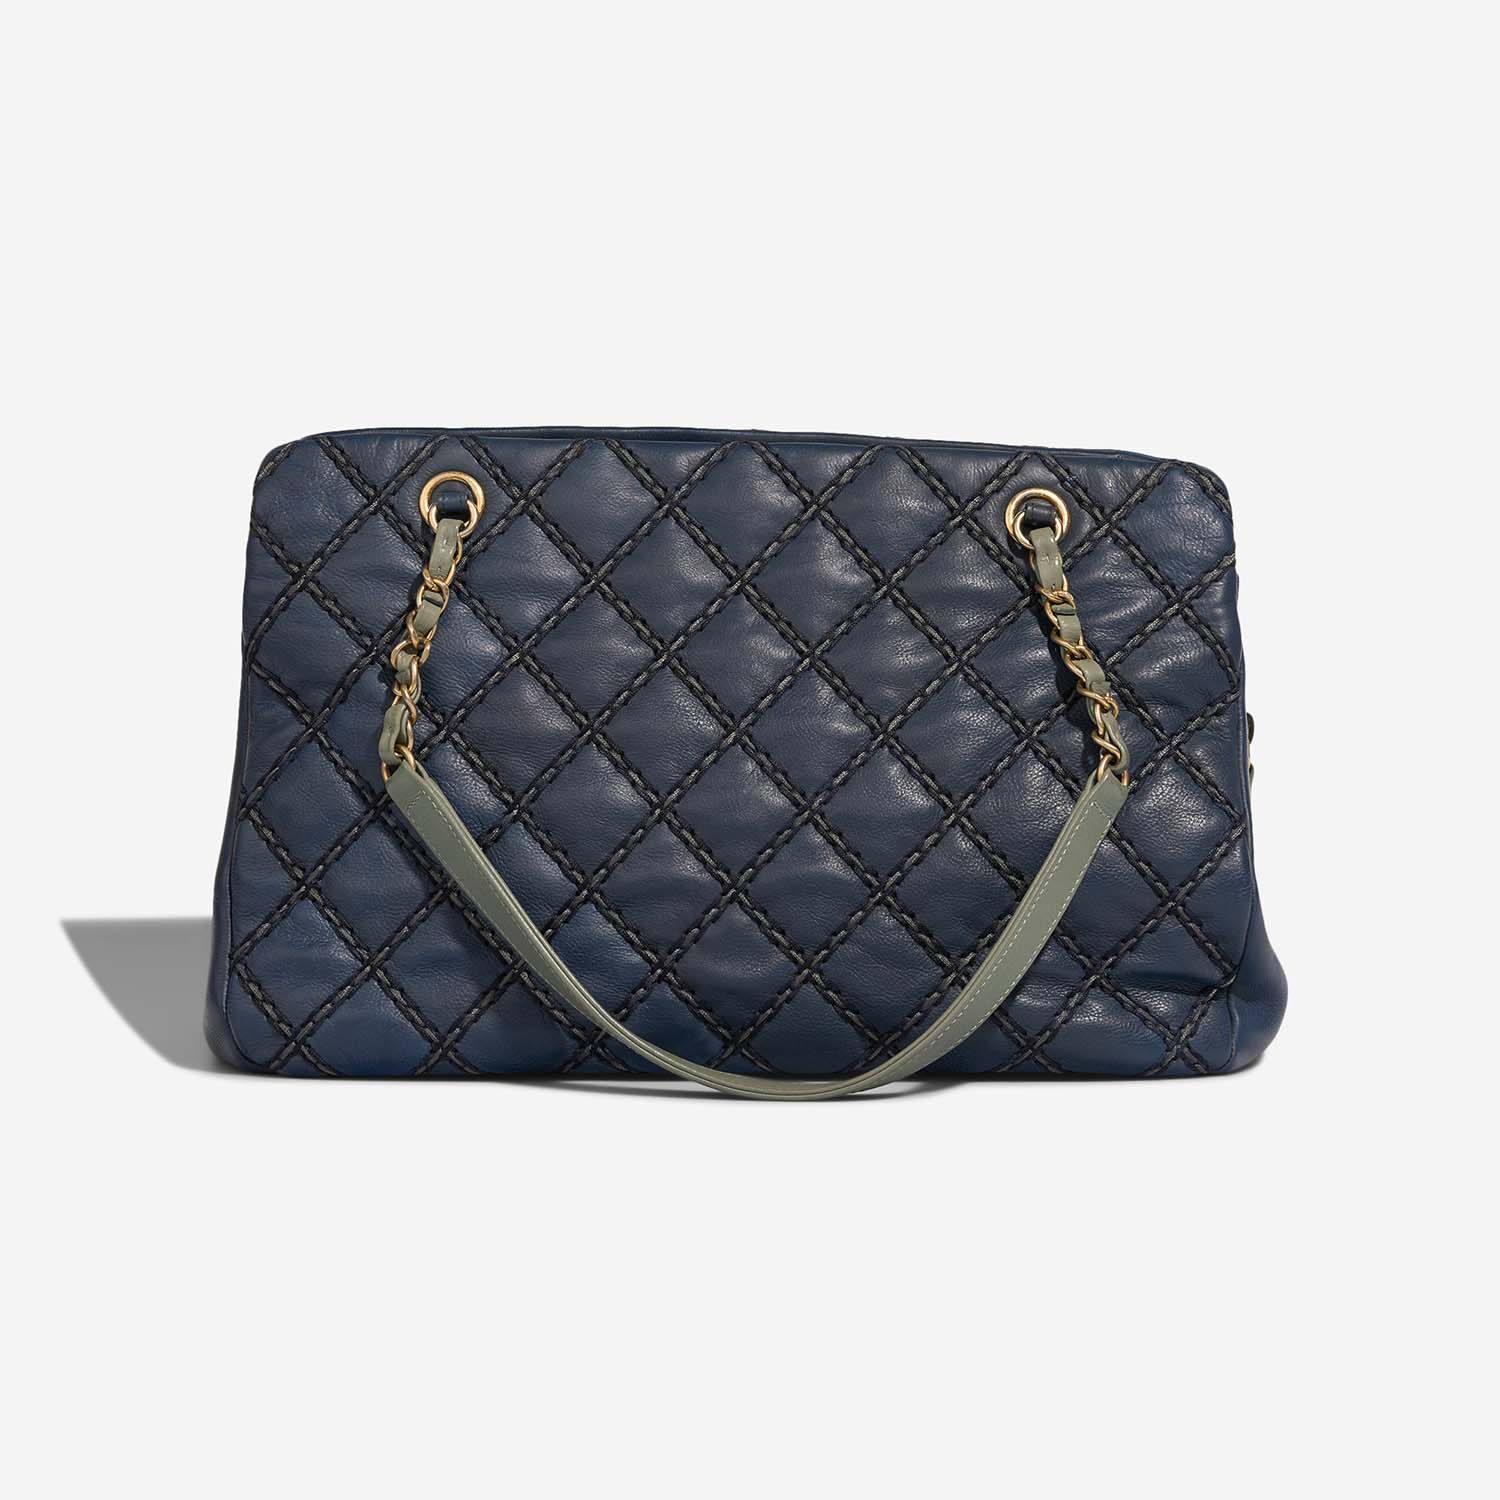 Chanel Shopping Tote Navy Back  | Sell your designer bag on Saclab.com